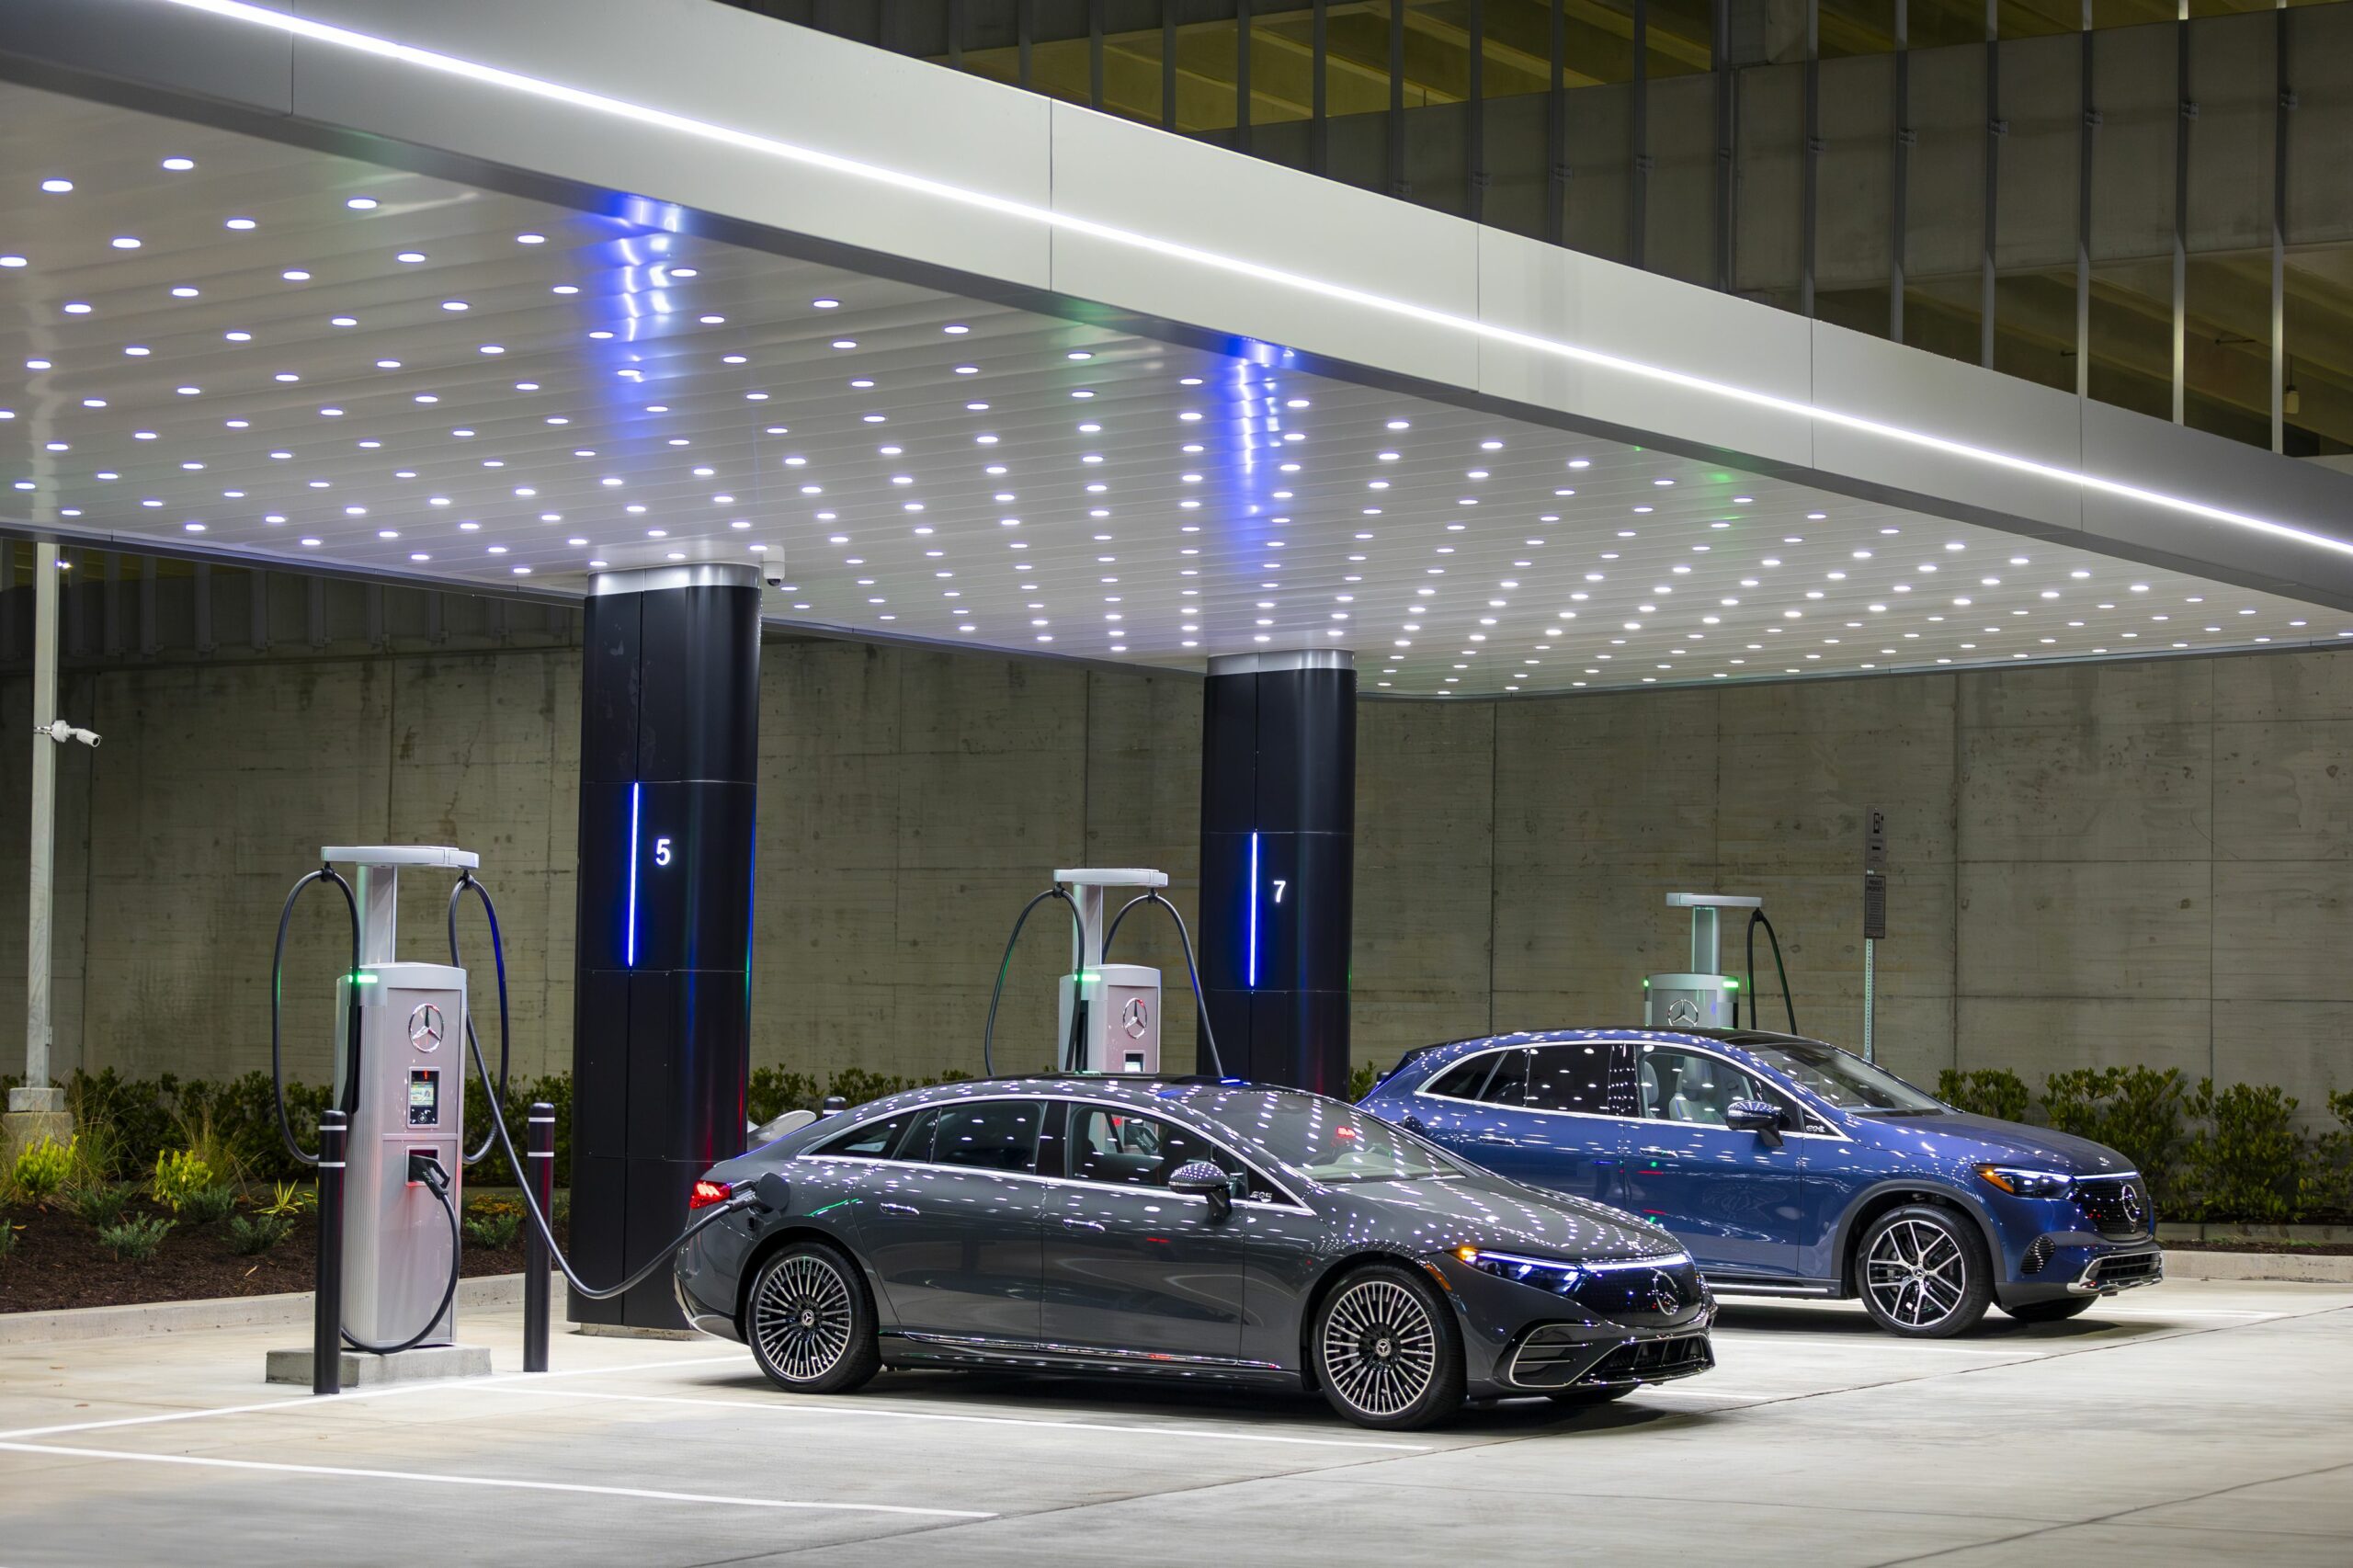 Premium charging stations for vehicles